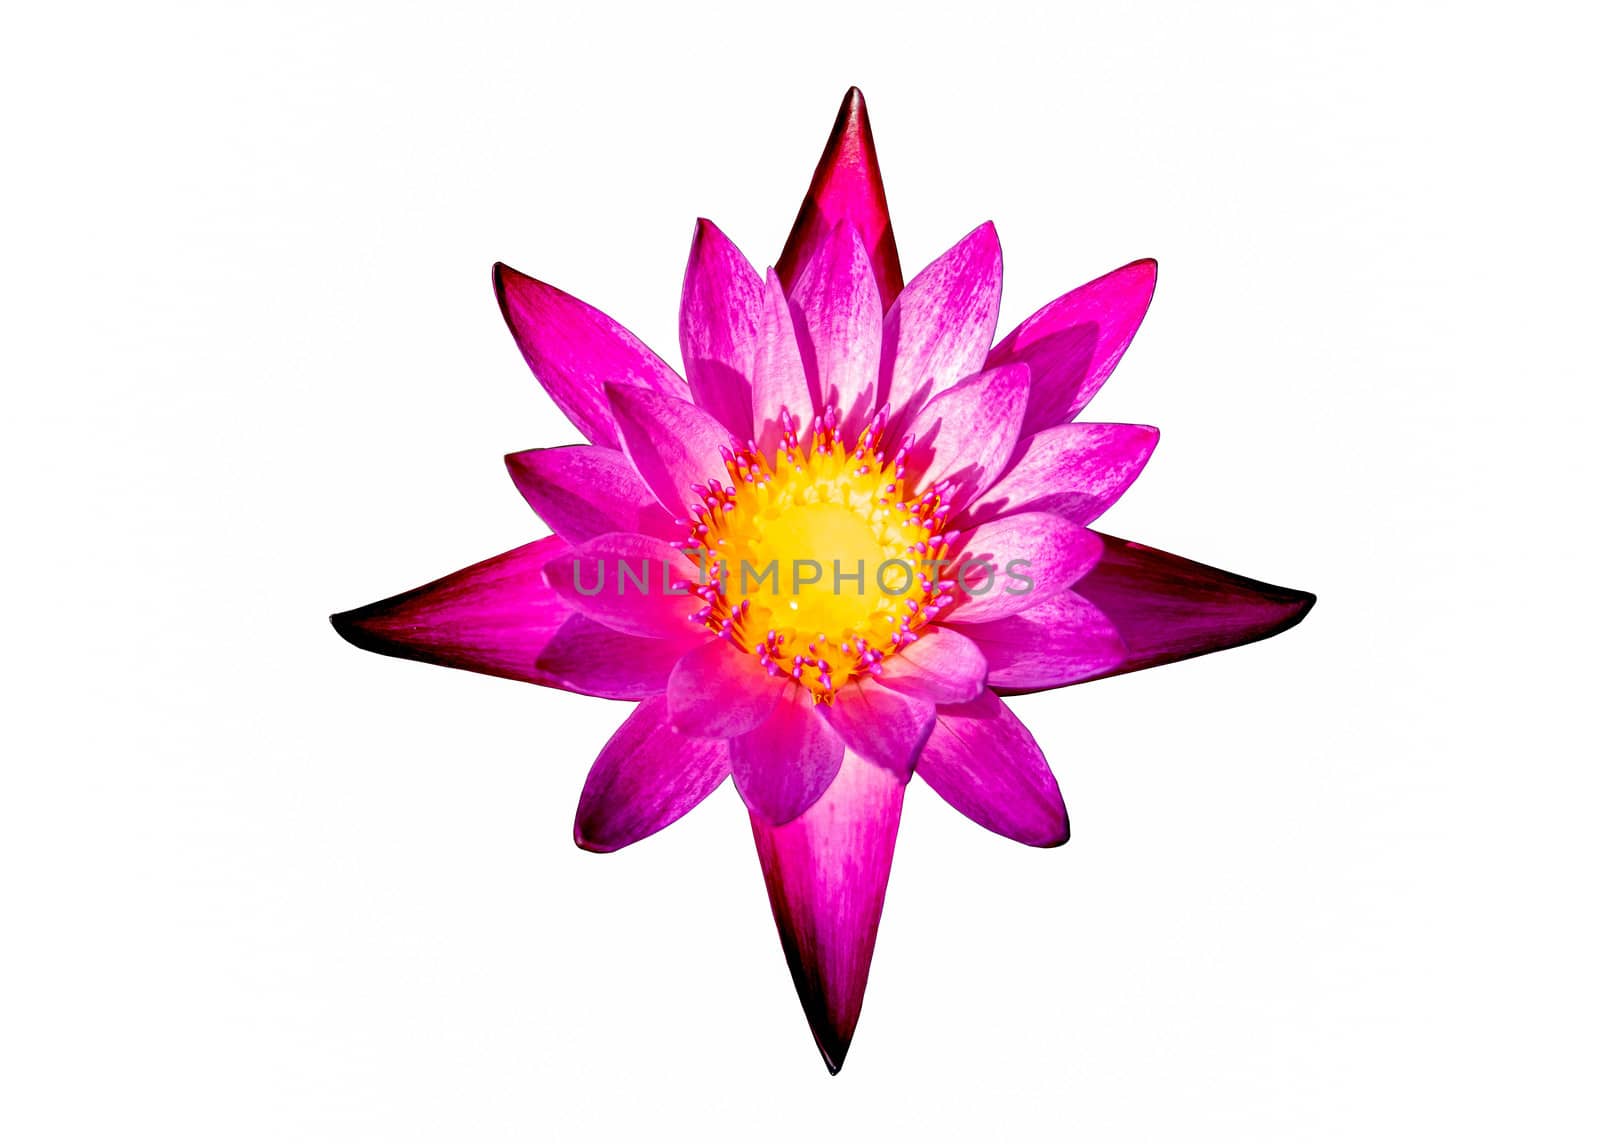 Beautiful pink lotus flower with yellow pollen, isolated on white background.